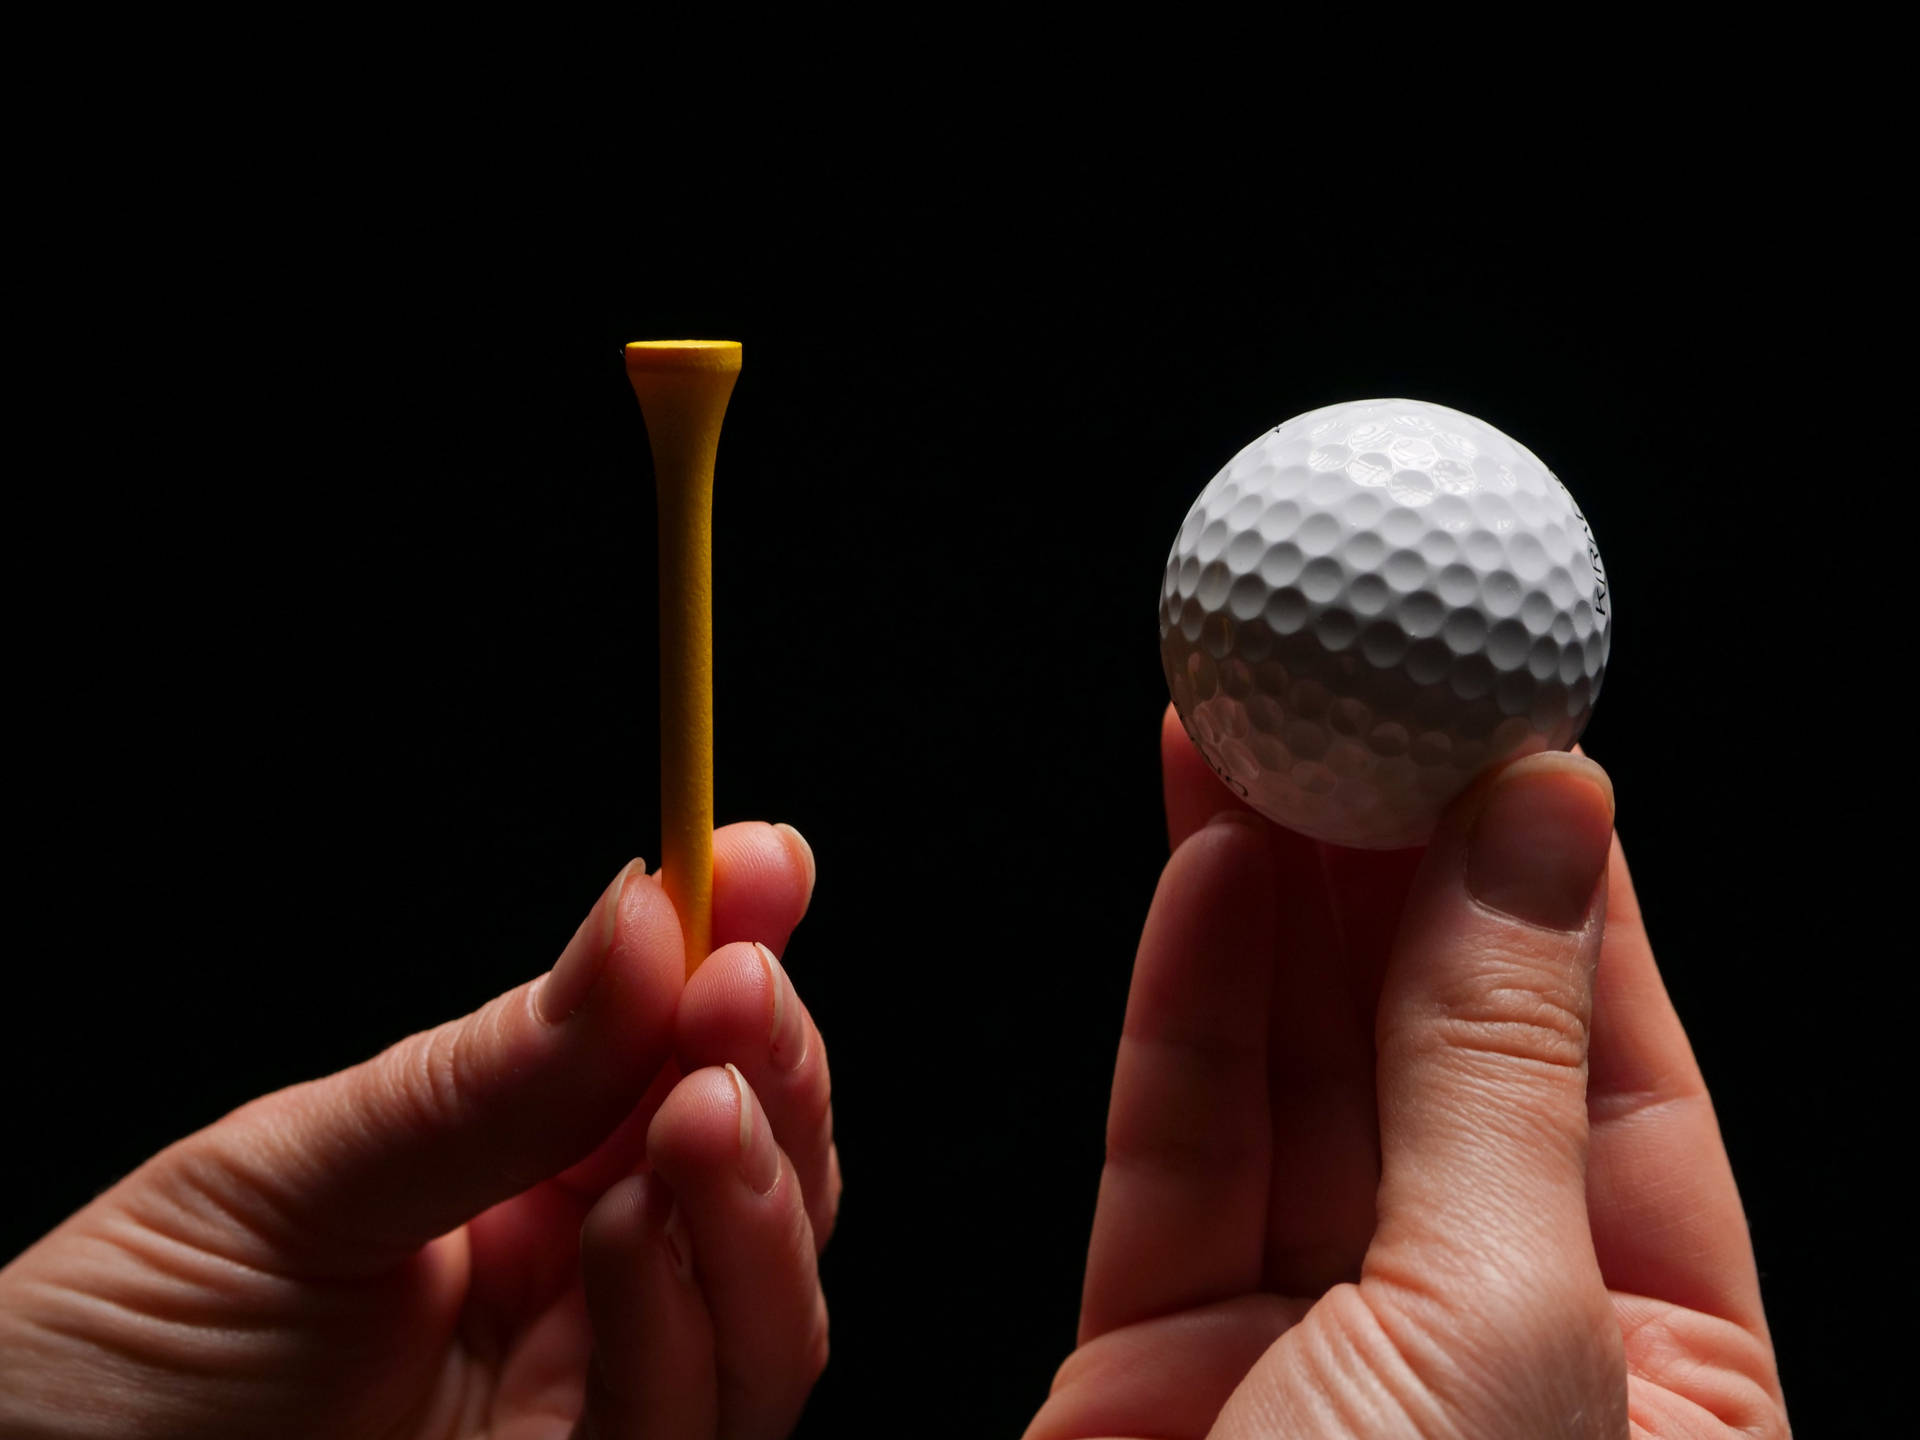 4k Hands Holding Golf Tee And Ball